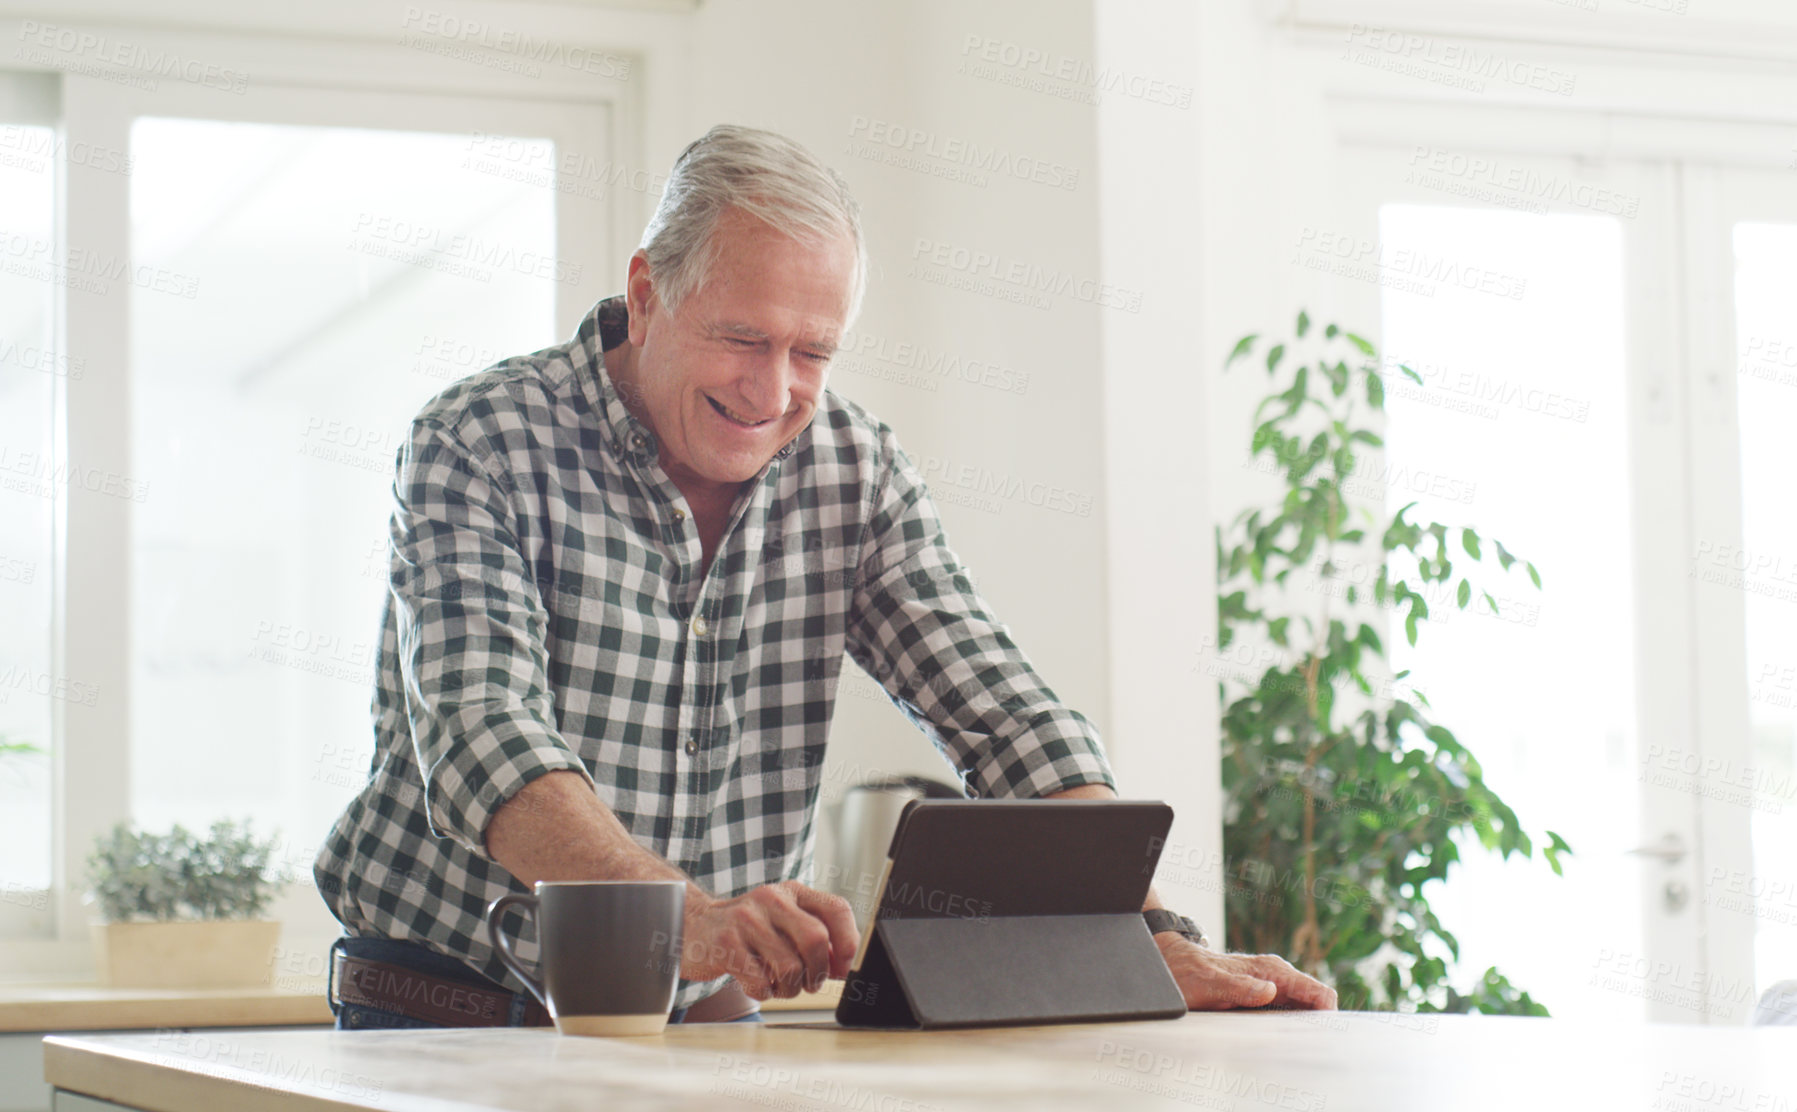 Buy stock photo Cropped shot of a senior man using a digital tablet at home